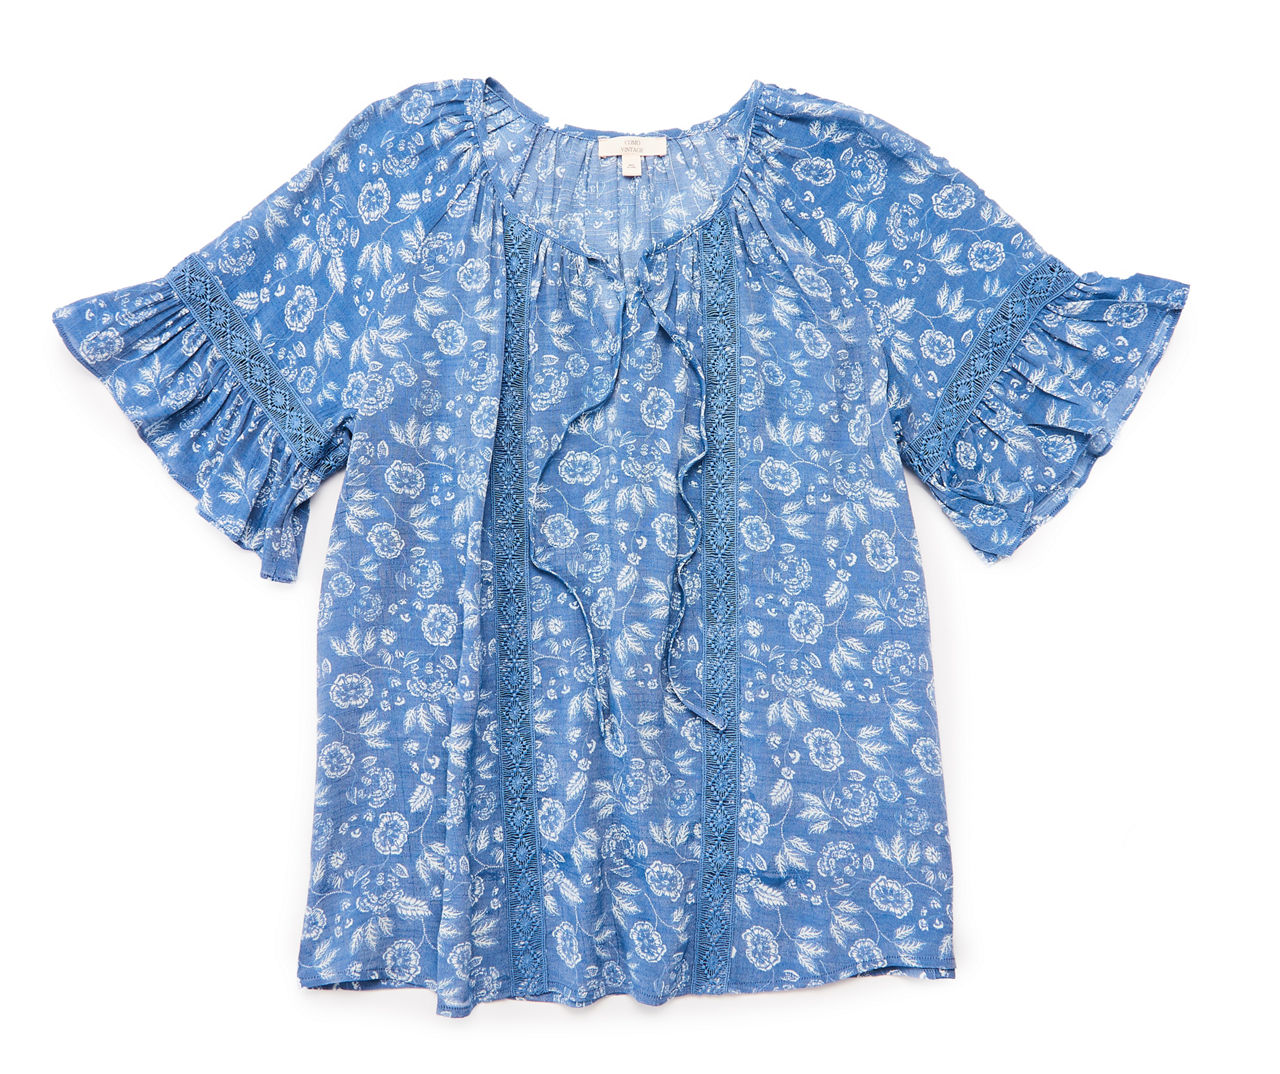 Women's Size M Galiano Blue & White Floral Lace-Accent Peasant Top